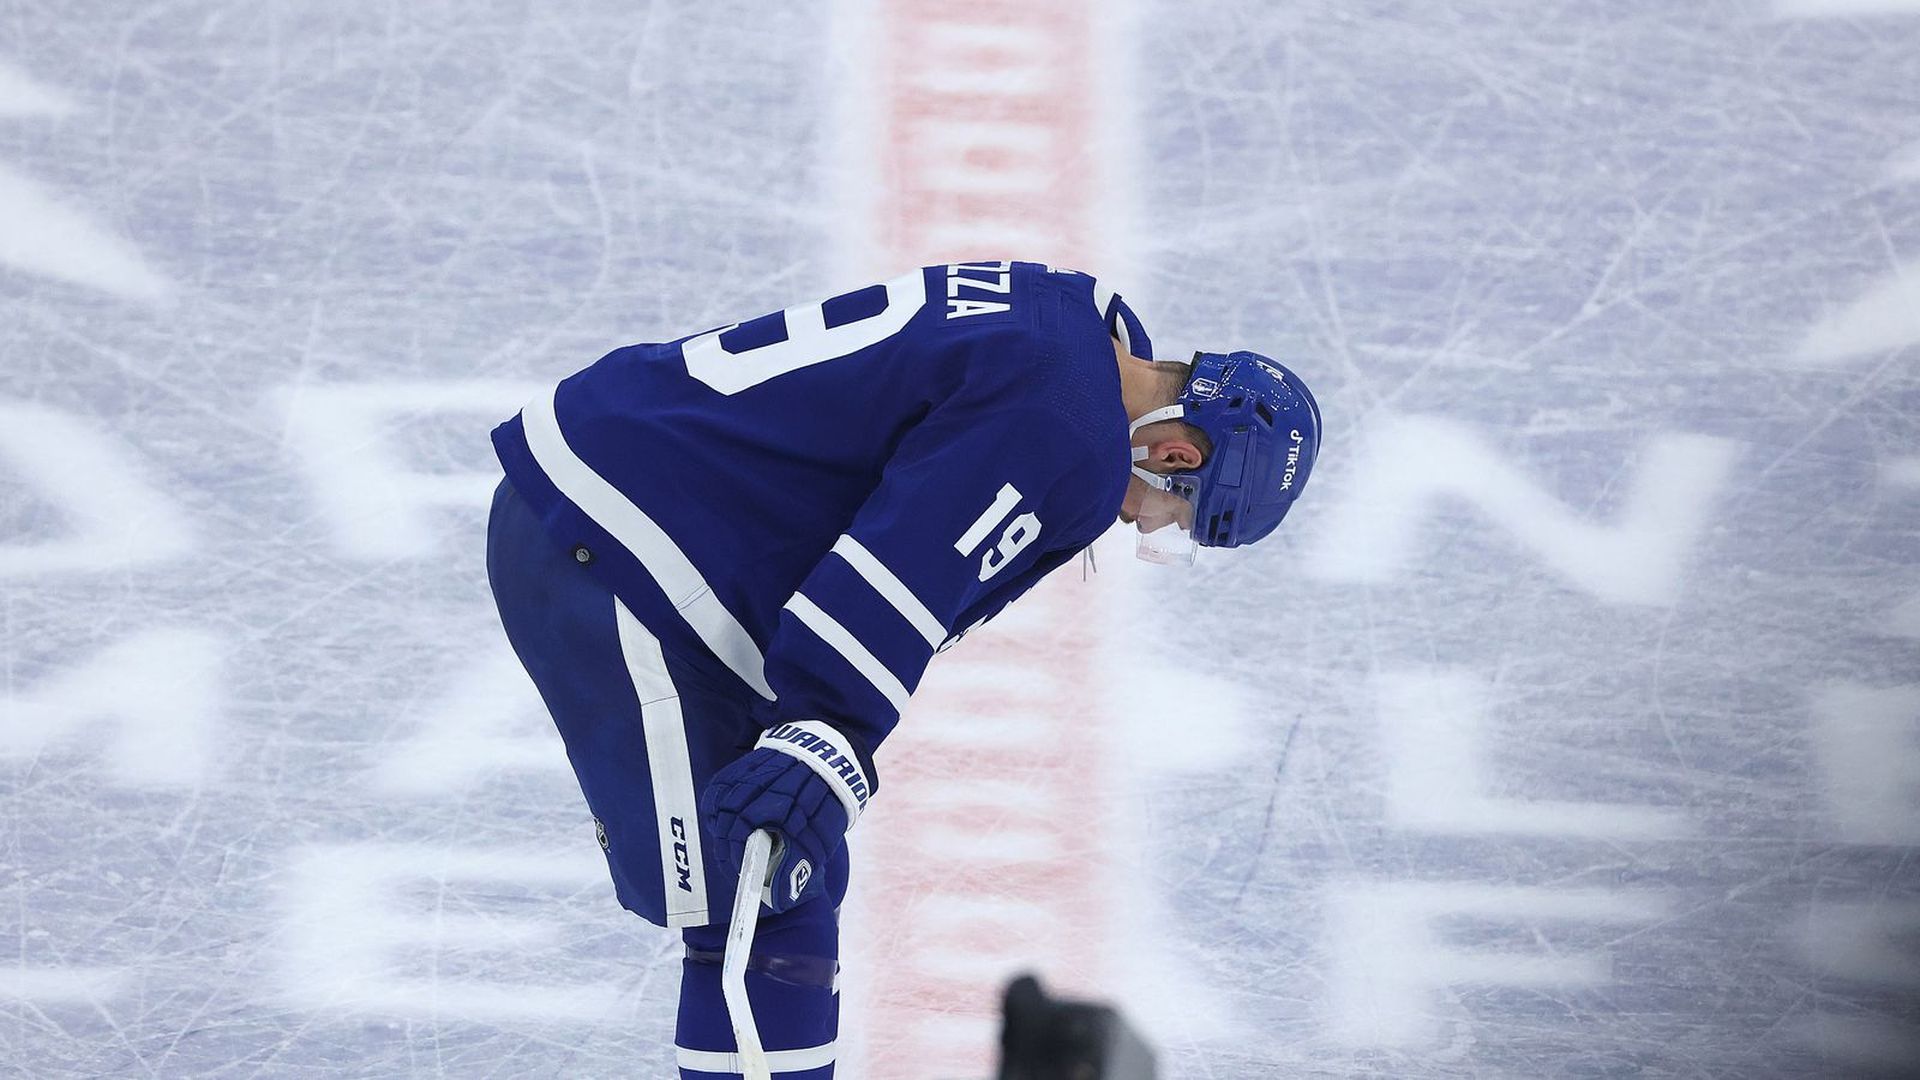 Point scores in OT, Lightning-Maple Leafs head to Game 7